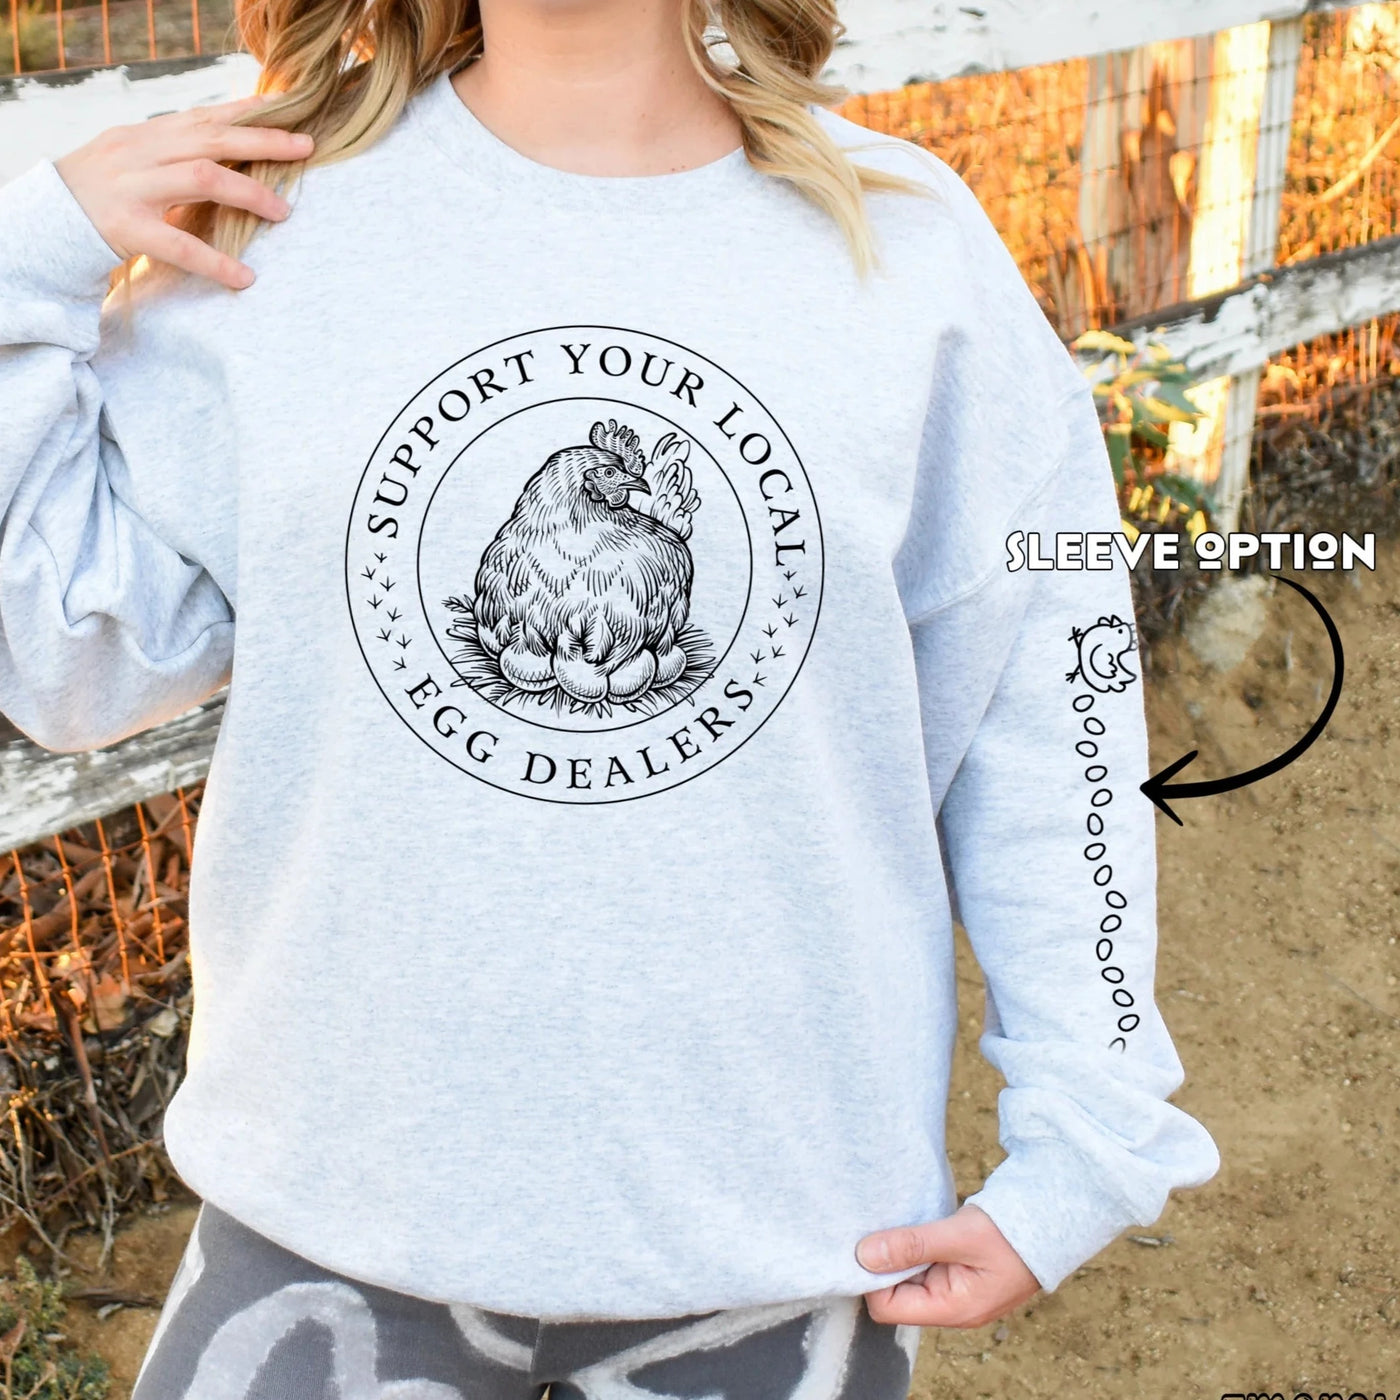 "Support Your Local Egg Dealers" Sweatshirt or T-shirt (shown on "Ash")